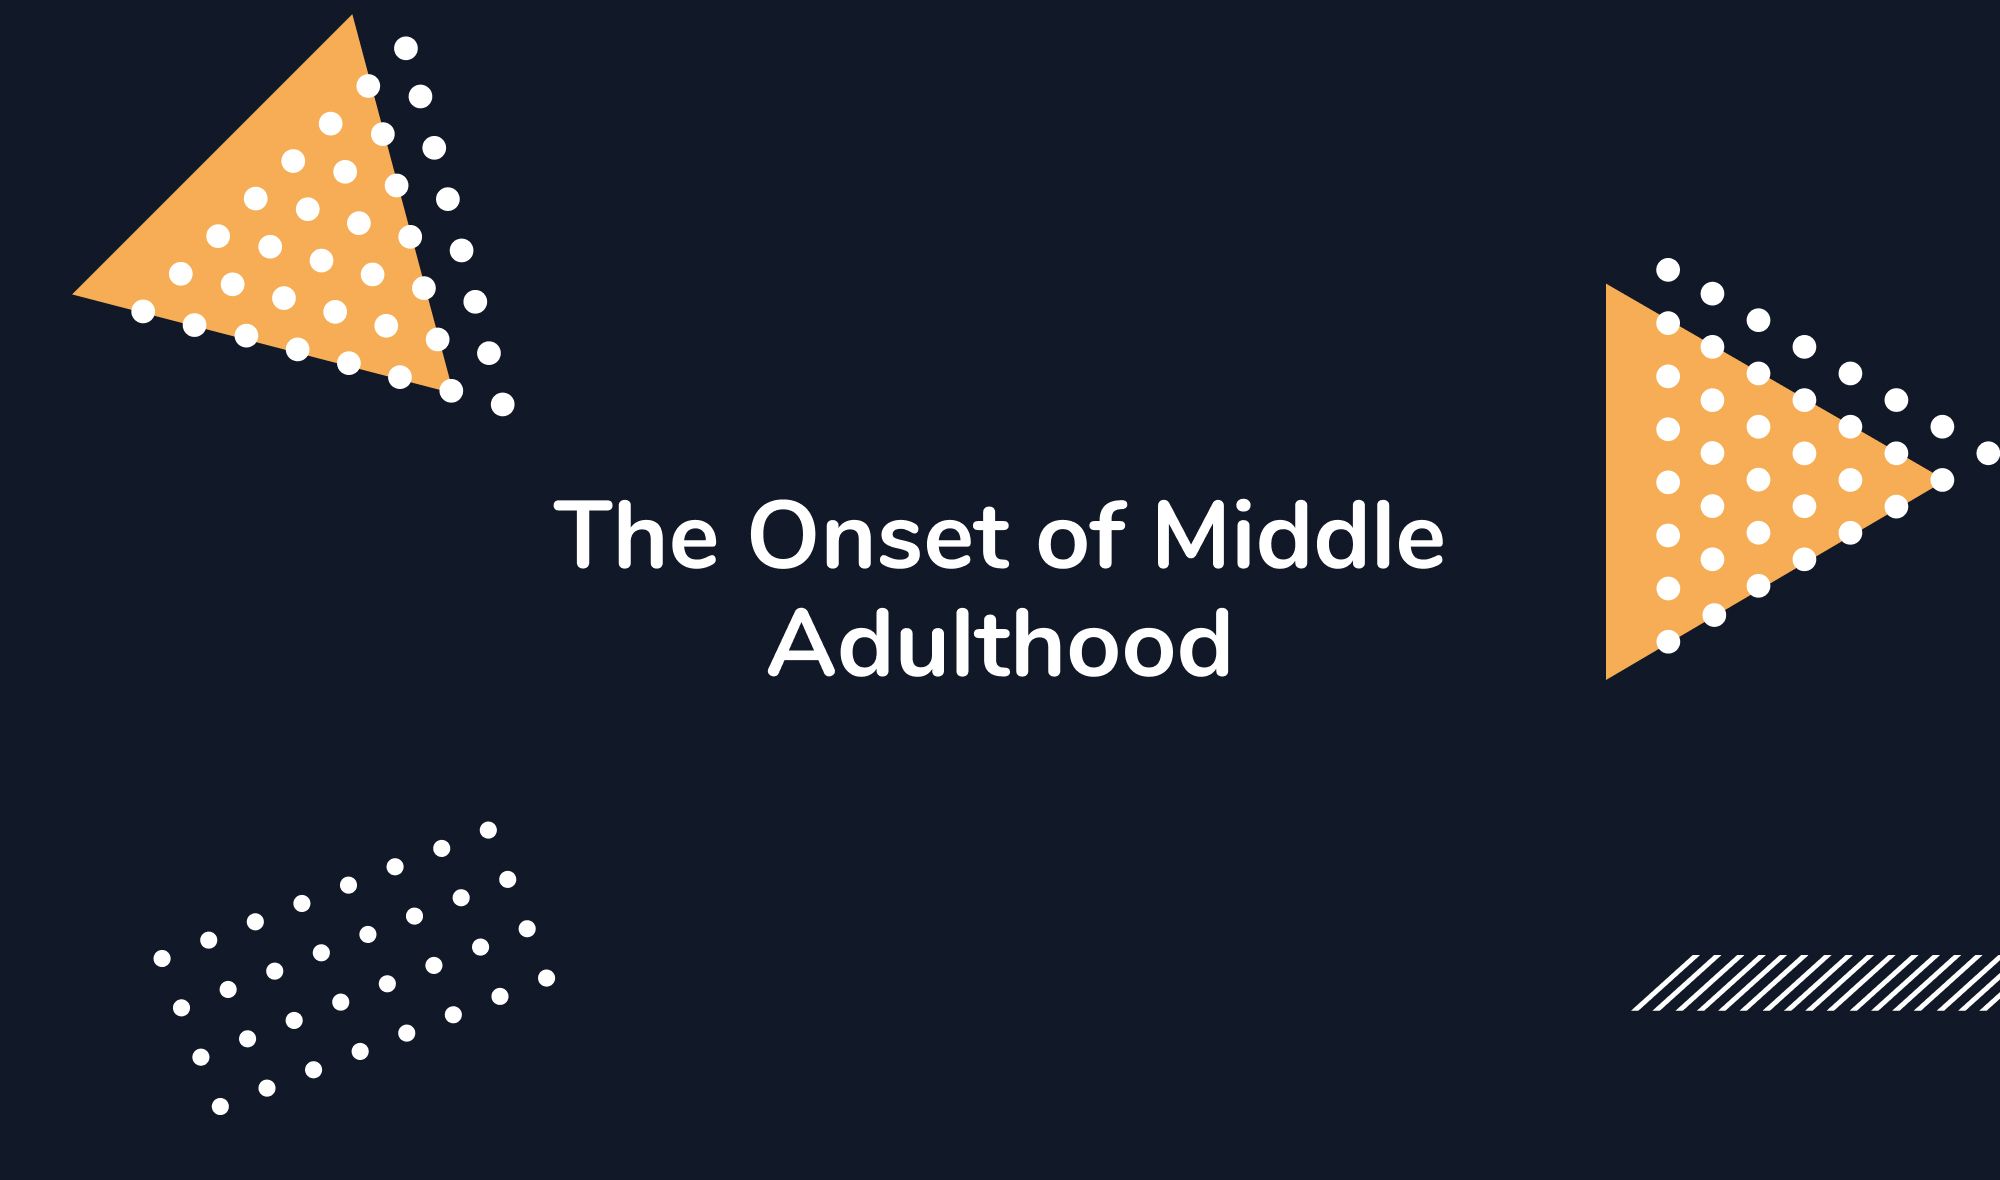 The Onset of Middle Adulthood: The Stage of Generativity vs Stagnation